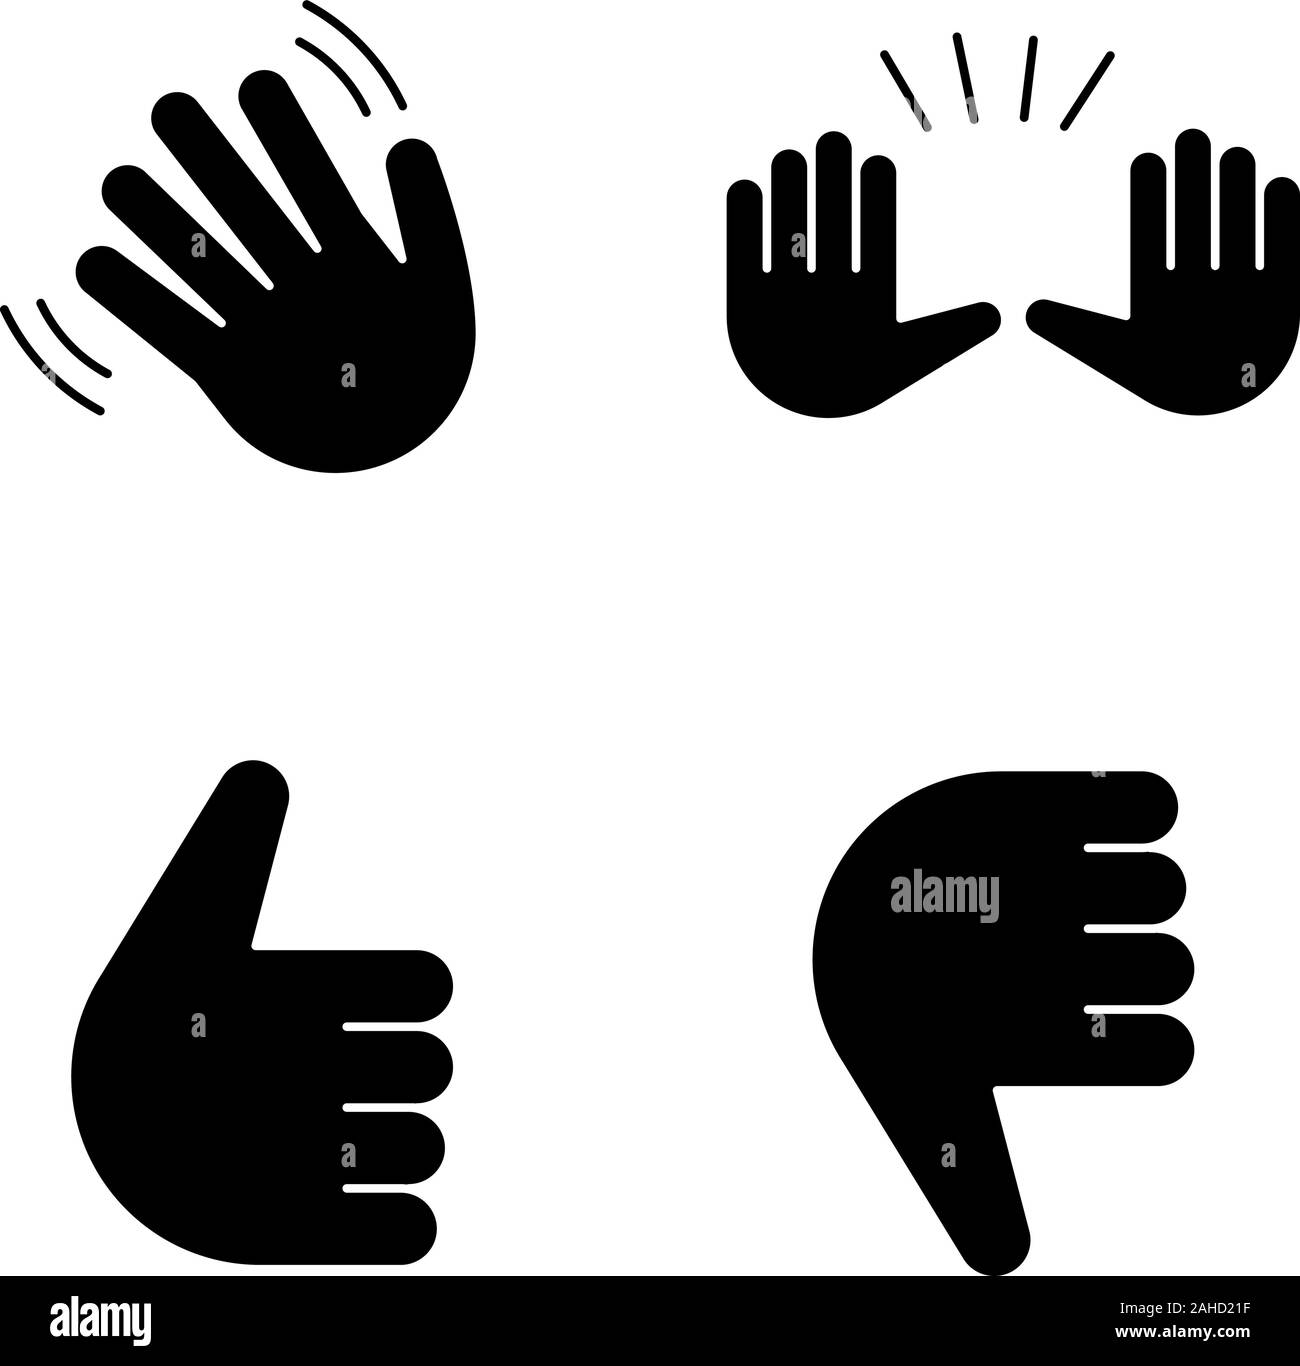 Hand gesture emojis glyph icons set. Hello, goodbye, stop, good job, disapproval gesturing. Waving and raising hands, thumbs up and down. Silhouette s Stock Vector